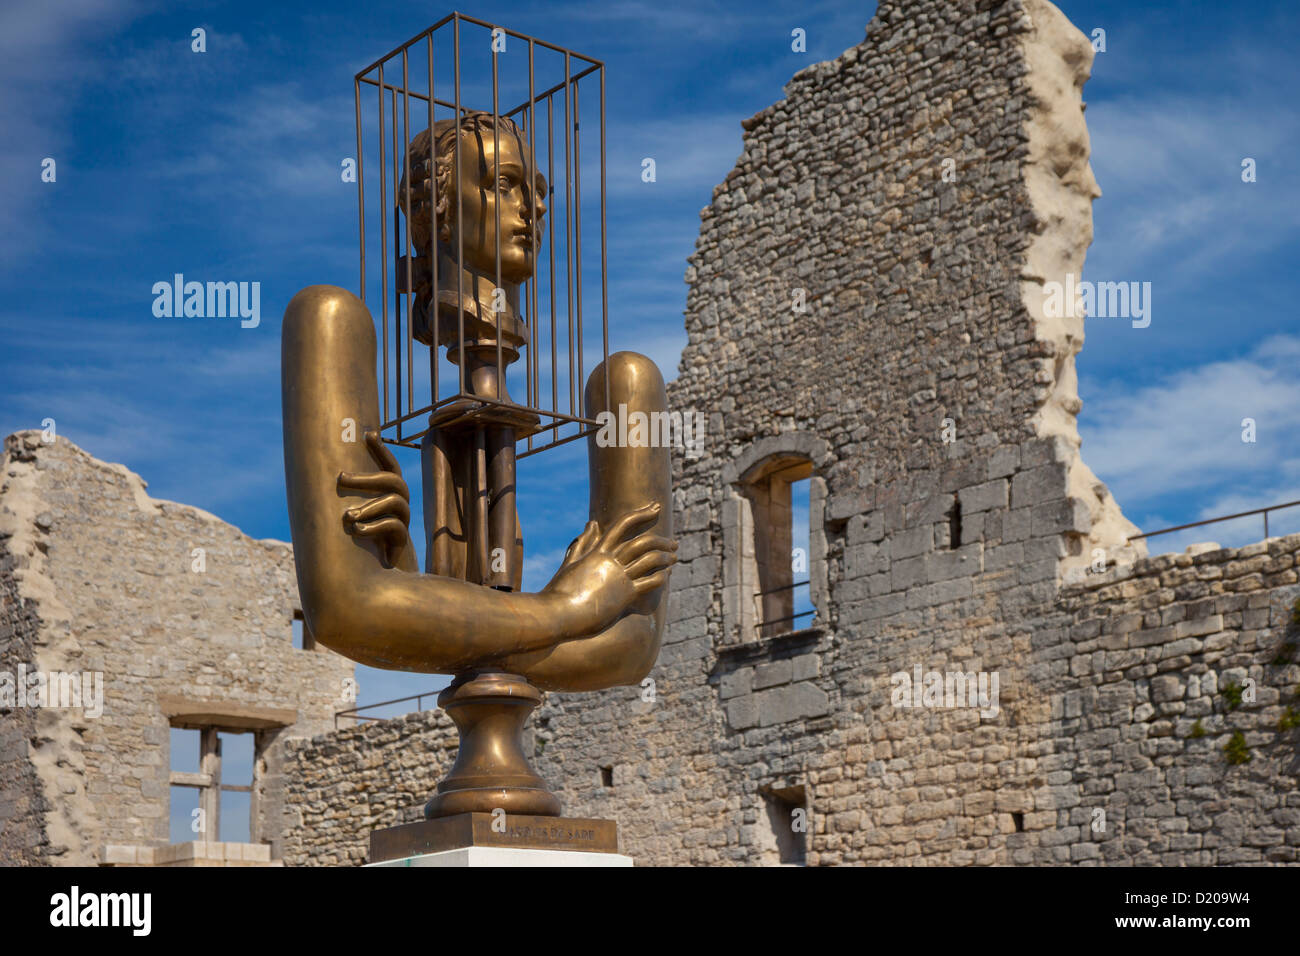 Metal Sculpture of Marquis de Sade by Alexandre Bourganov Vaucluse Luberon Provence France Stock Photo - Alamy